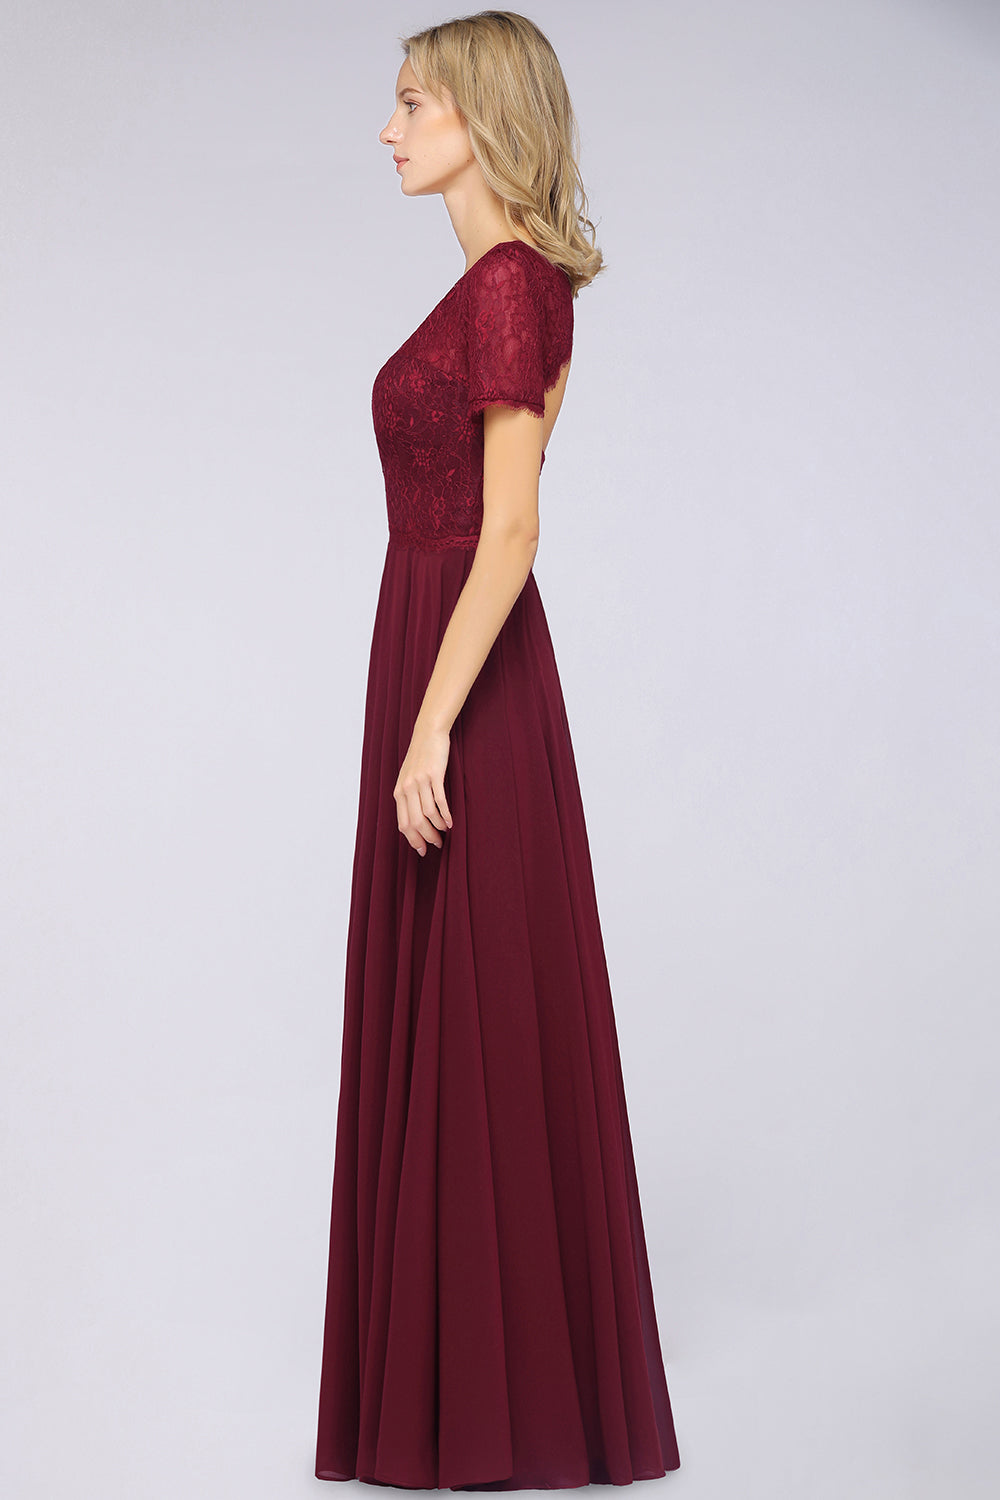 Chic Lace Long Burgundy Backless Bridesmaid Dress With Short-Sleeves-27dress